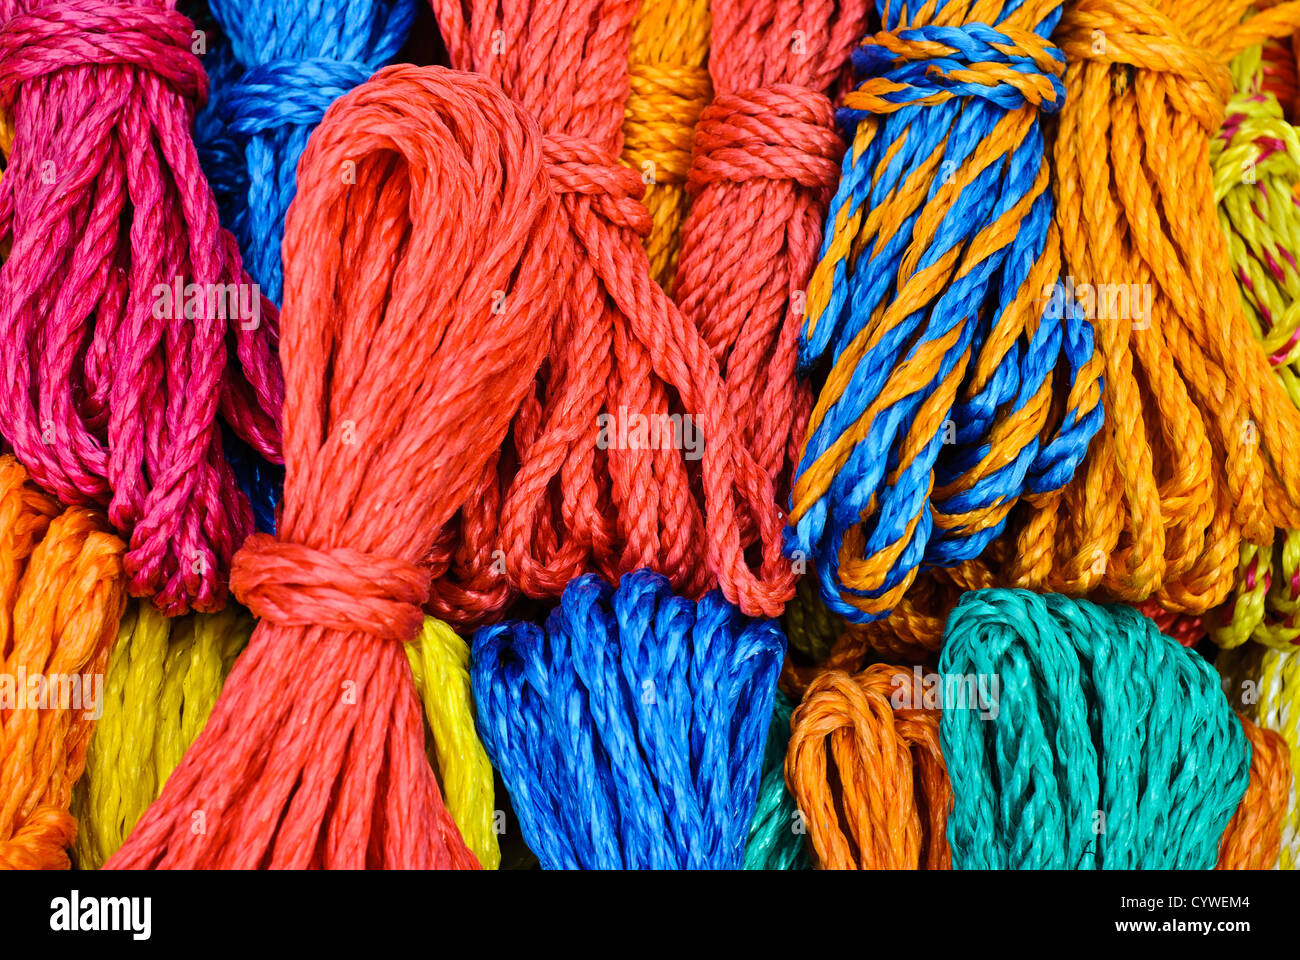 Brightly colored ropes for sale at a market in Antigua Guatemala. Famous for its well-preserved Spanish baroque architecture as well as a number of ruins from earthquakes, Antigua Guatemala is a UNESCO World Heritage Site and former capital of Guatemala. Stock Photo